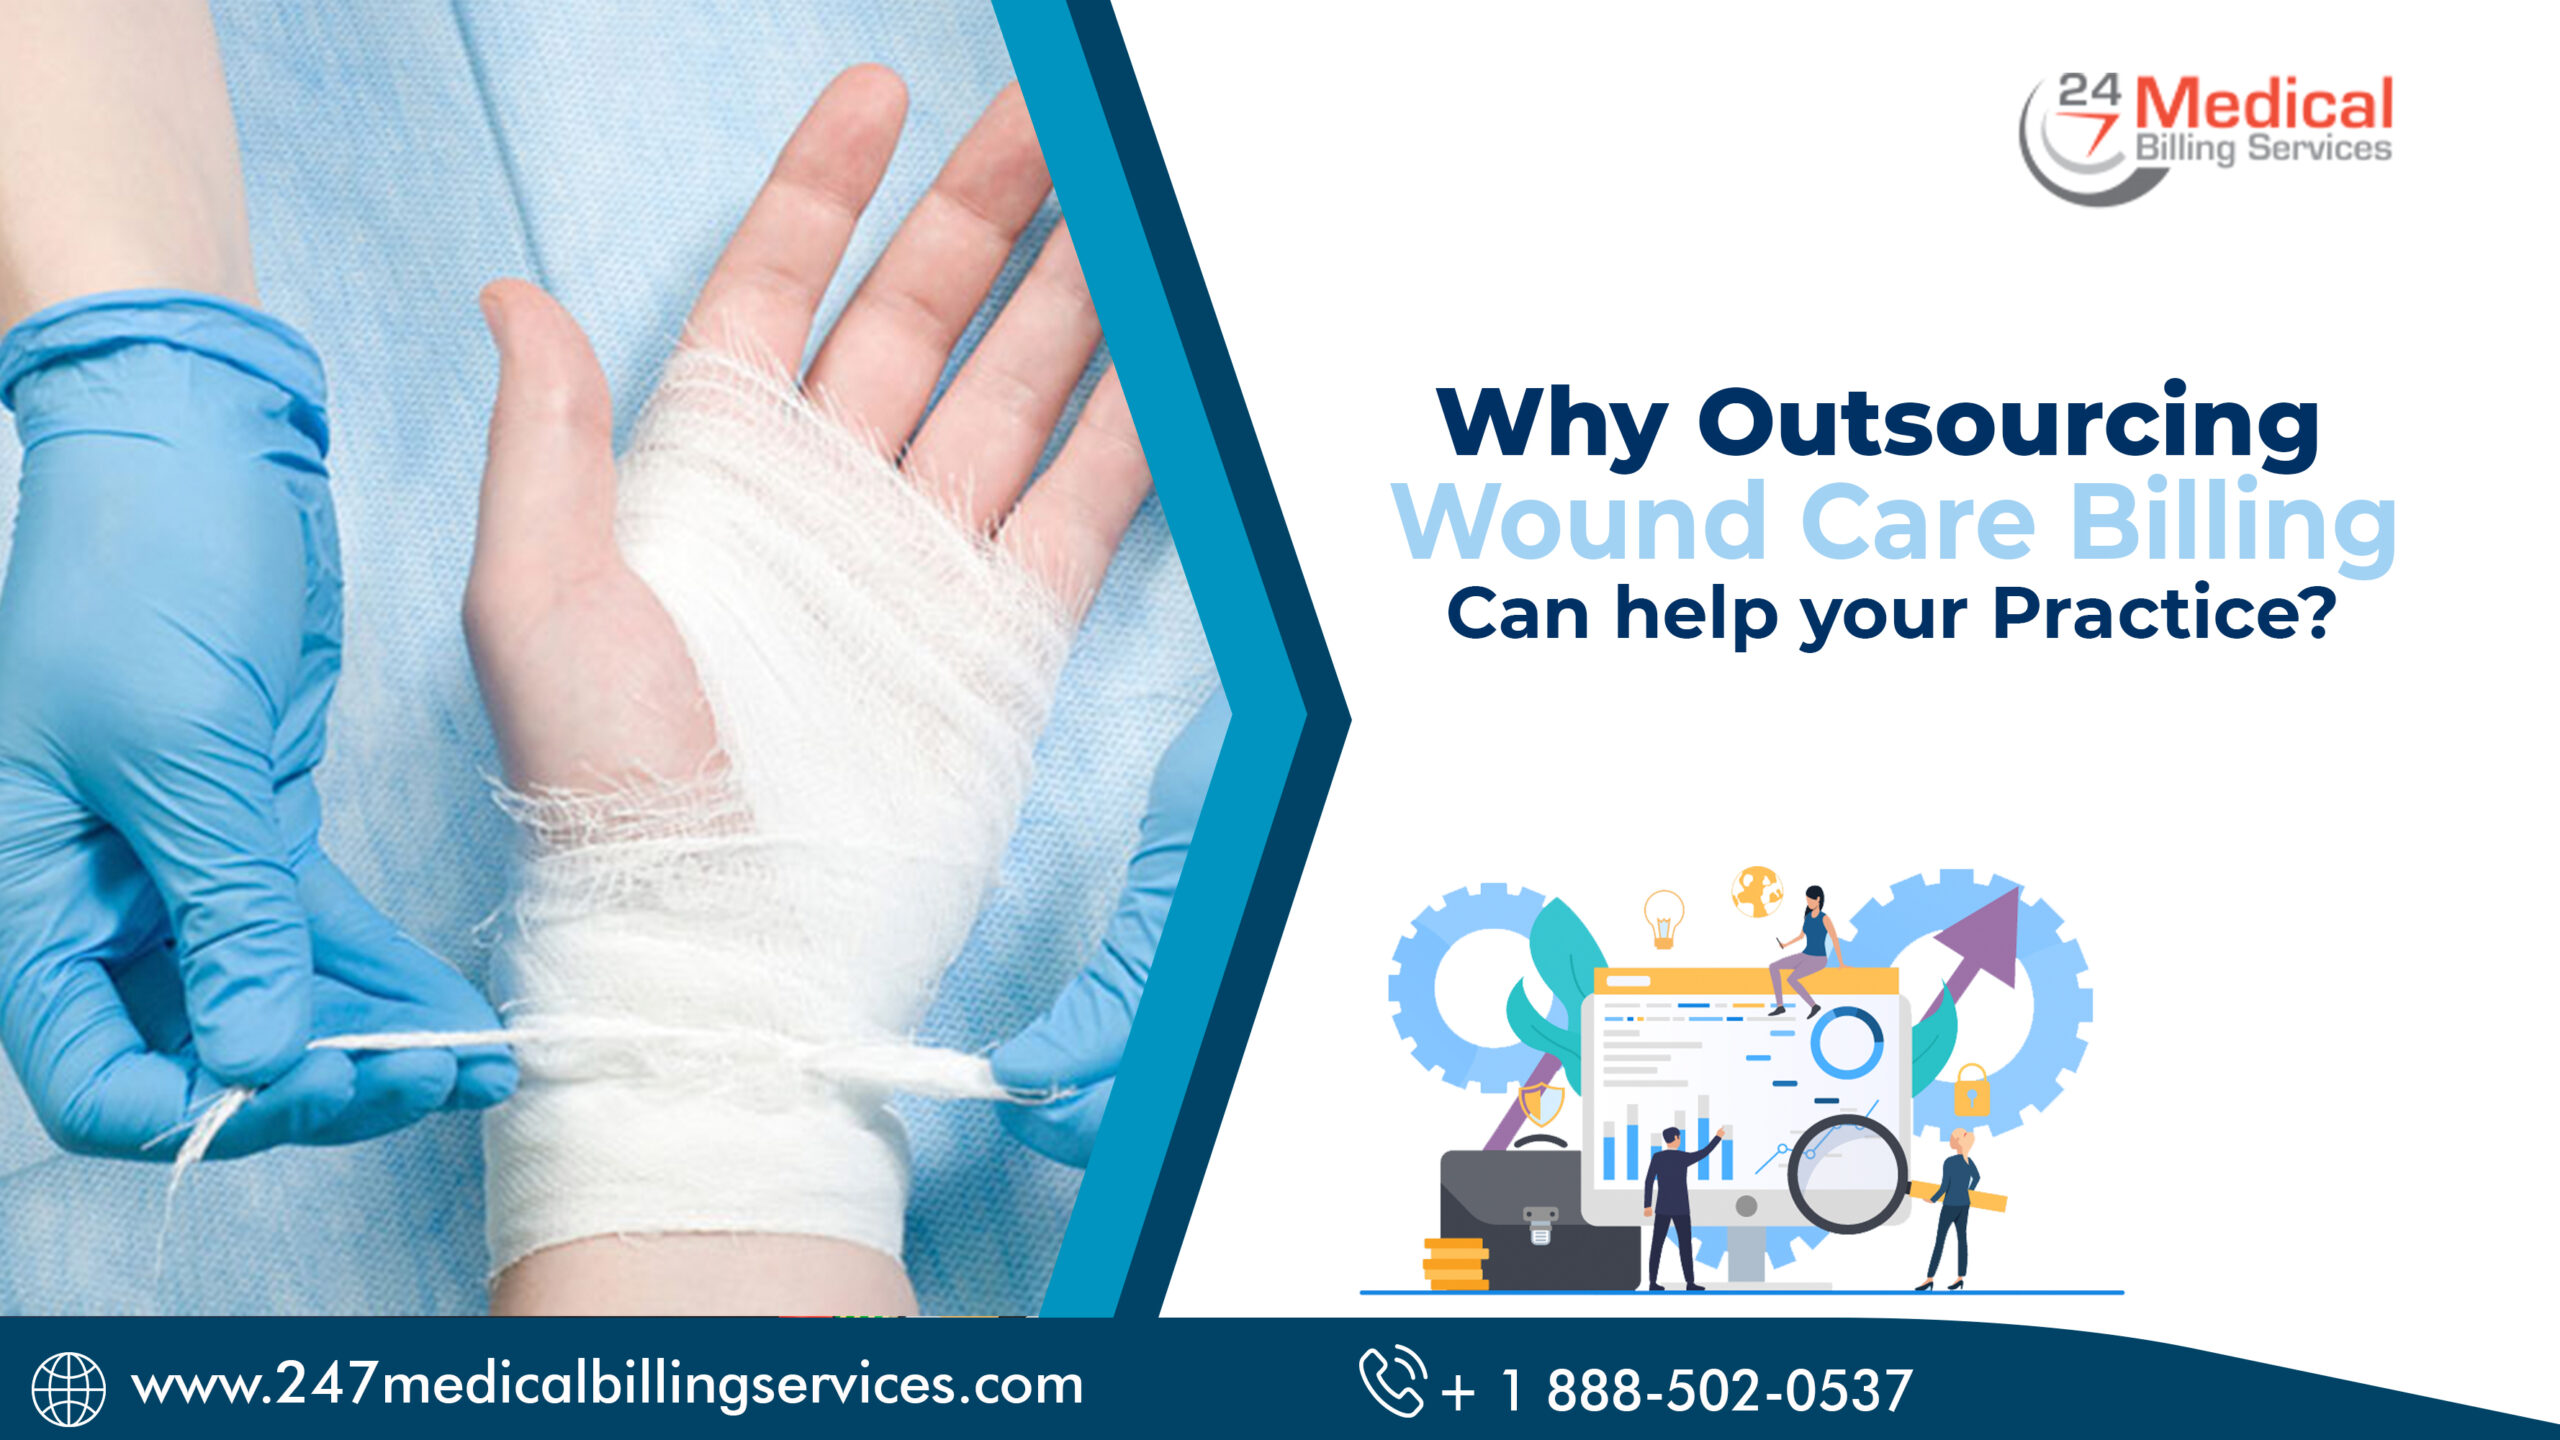  Why Outsourcing Wound Care Billing Can help your Practice?